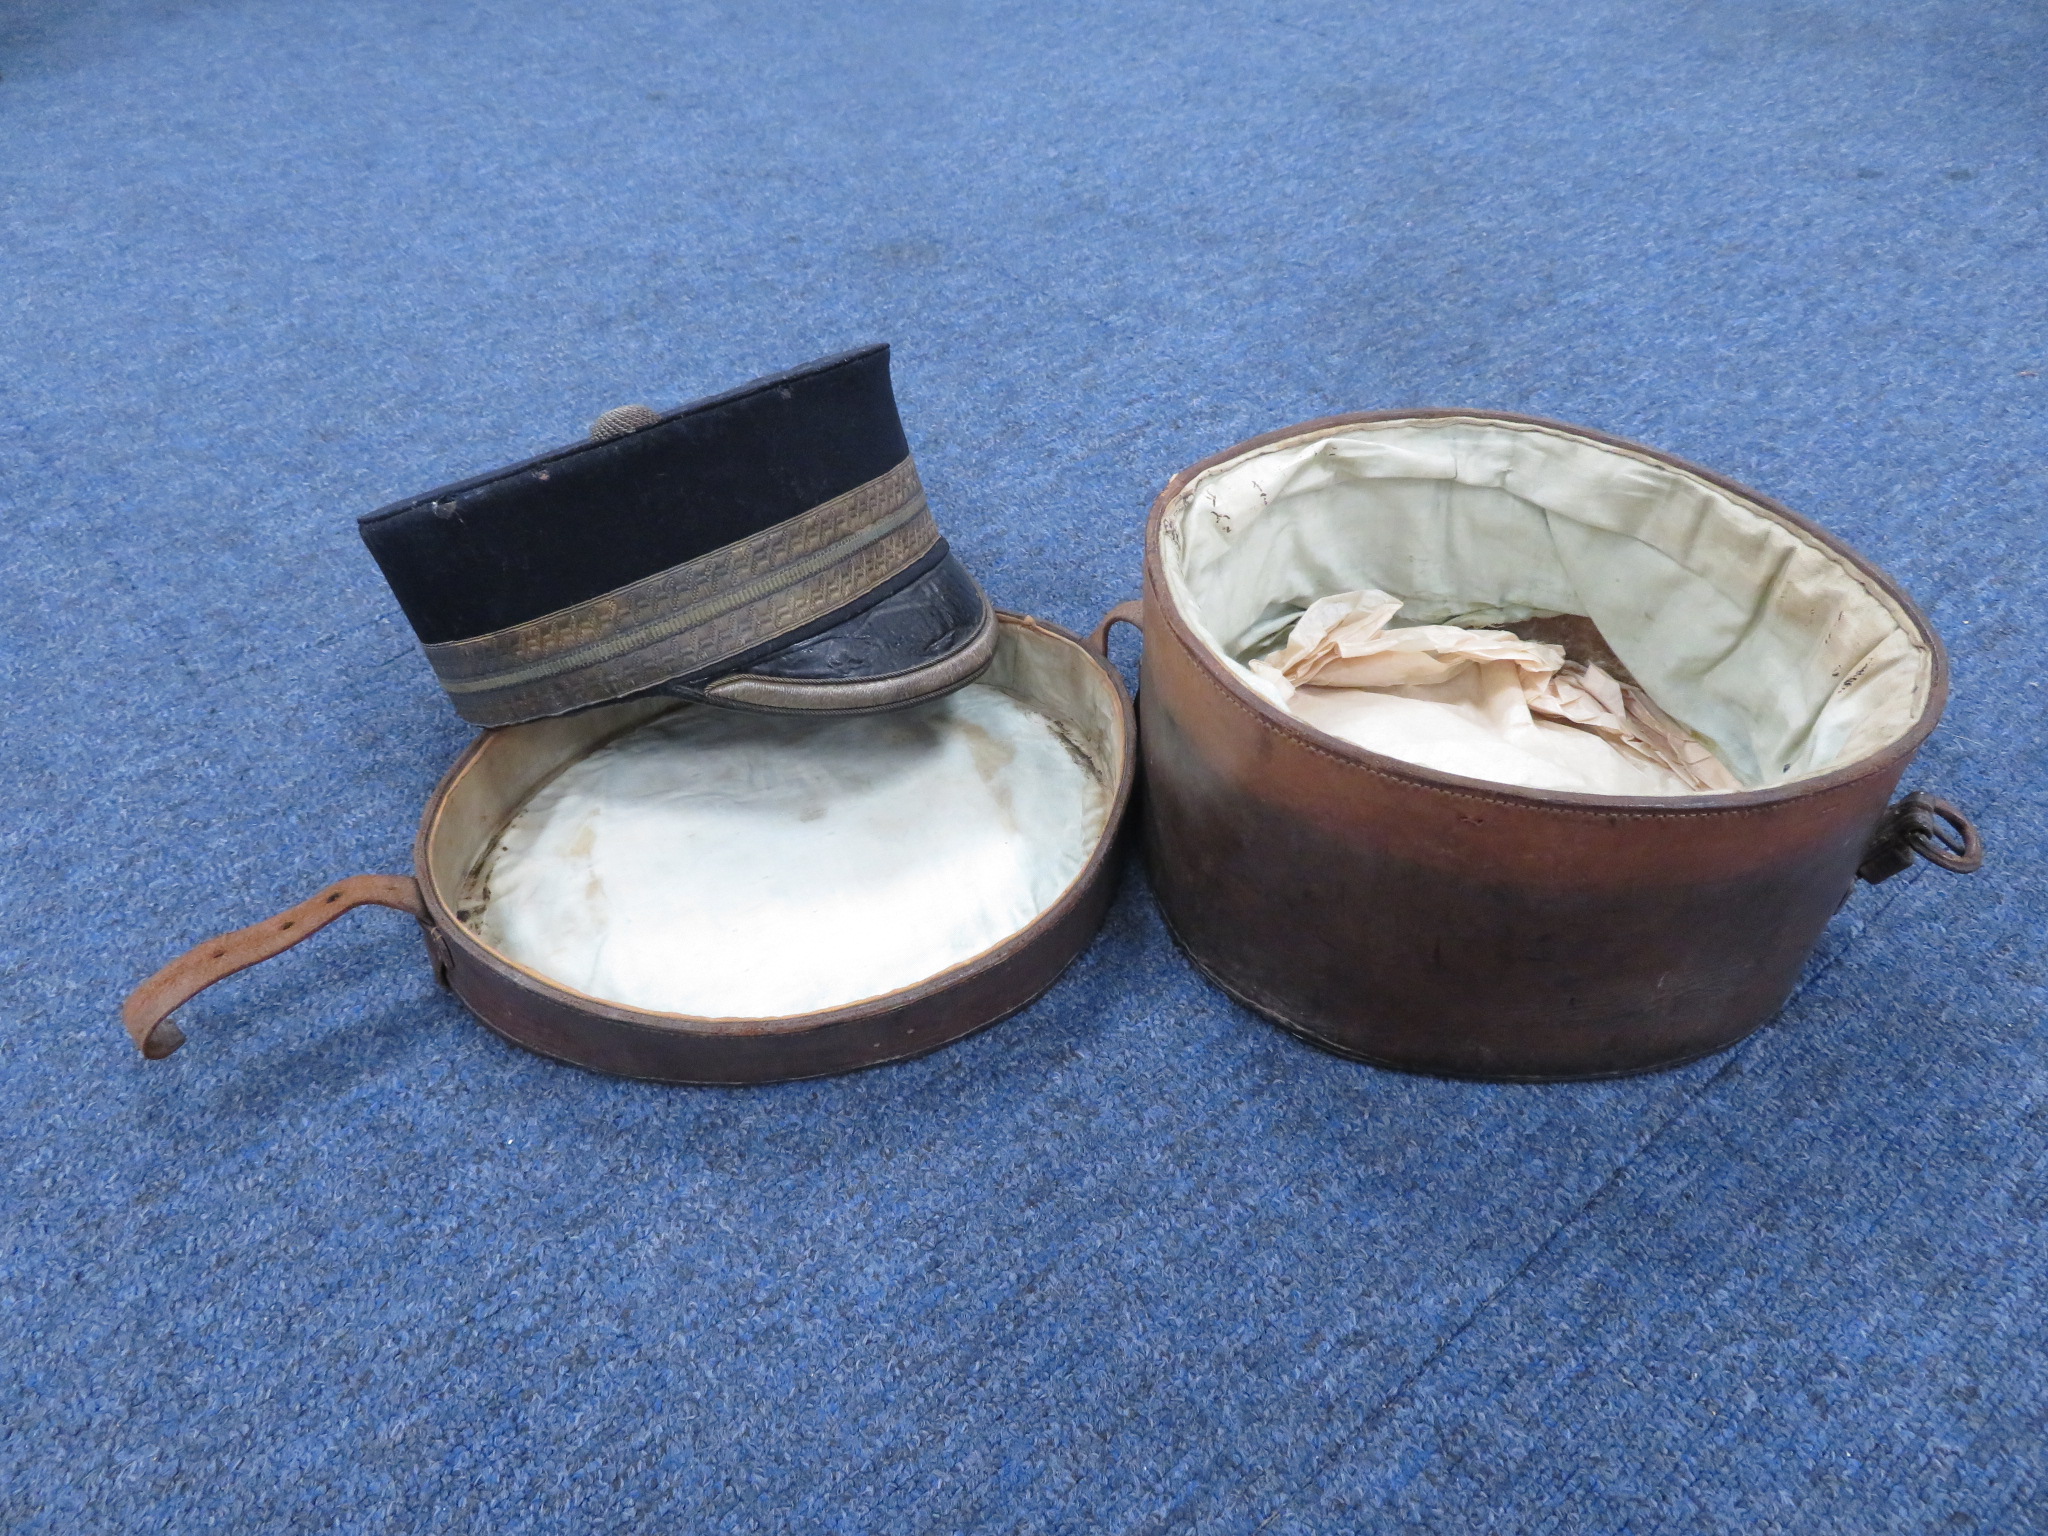 Victorian officers pillow box hat, in blue cloth with black leather peak housed in a brown leather